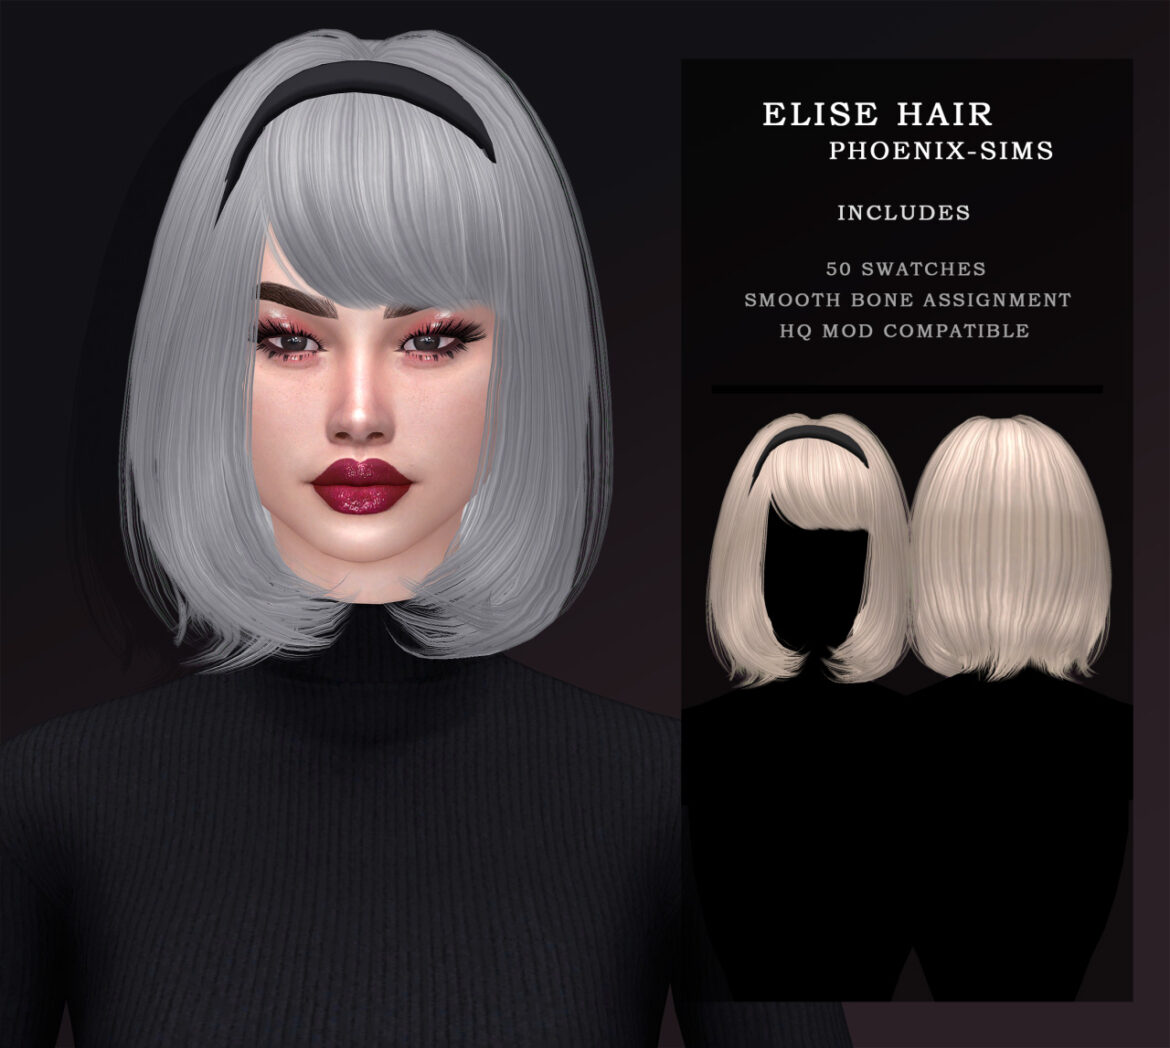 XENA, ELISE & RILEY HAIRS BY PHOENIX-SIMS